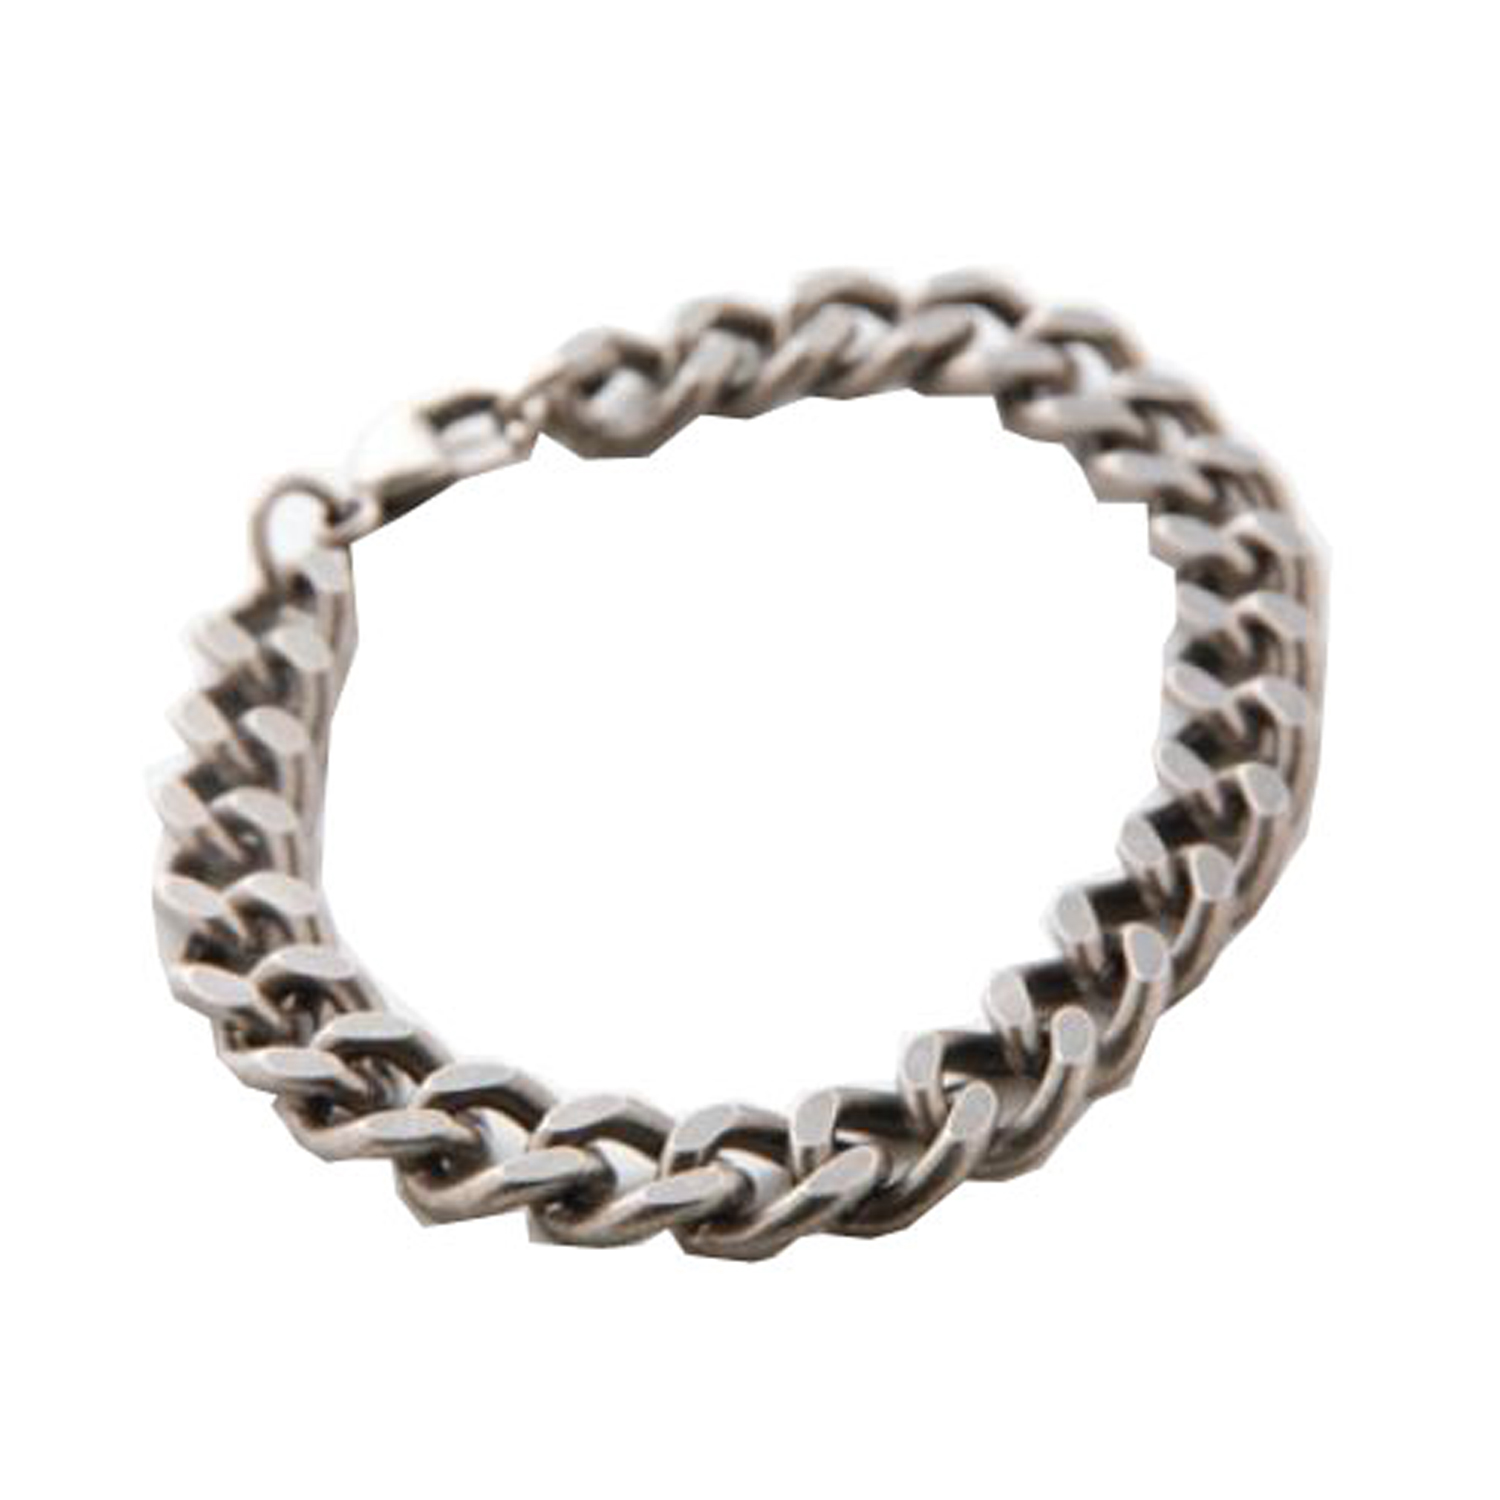 OXXO-mens-curb-chain-stainless-steel-barcelet